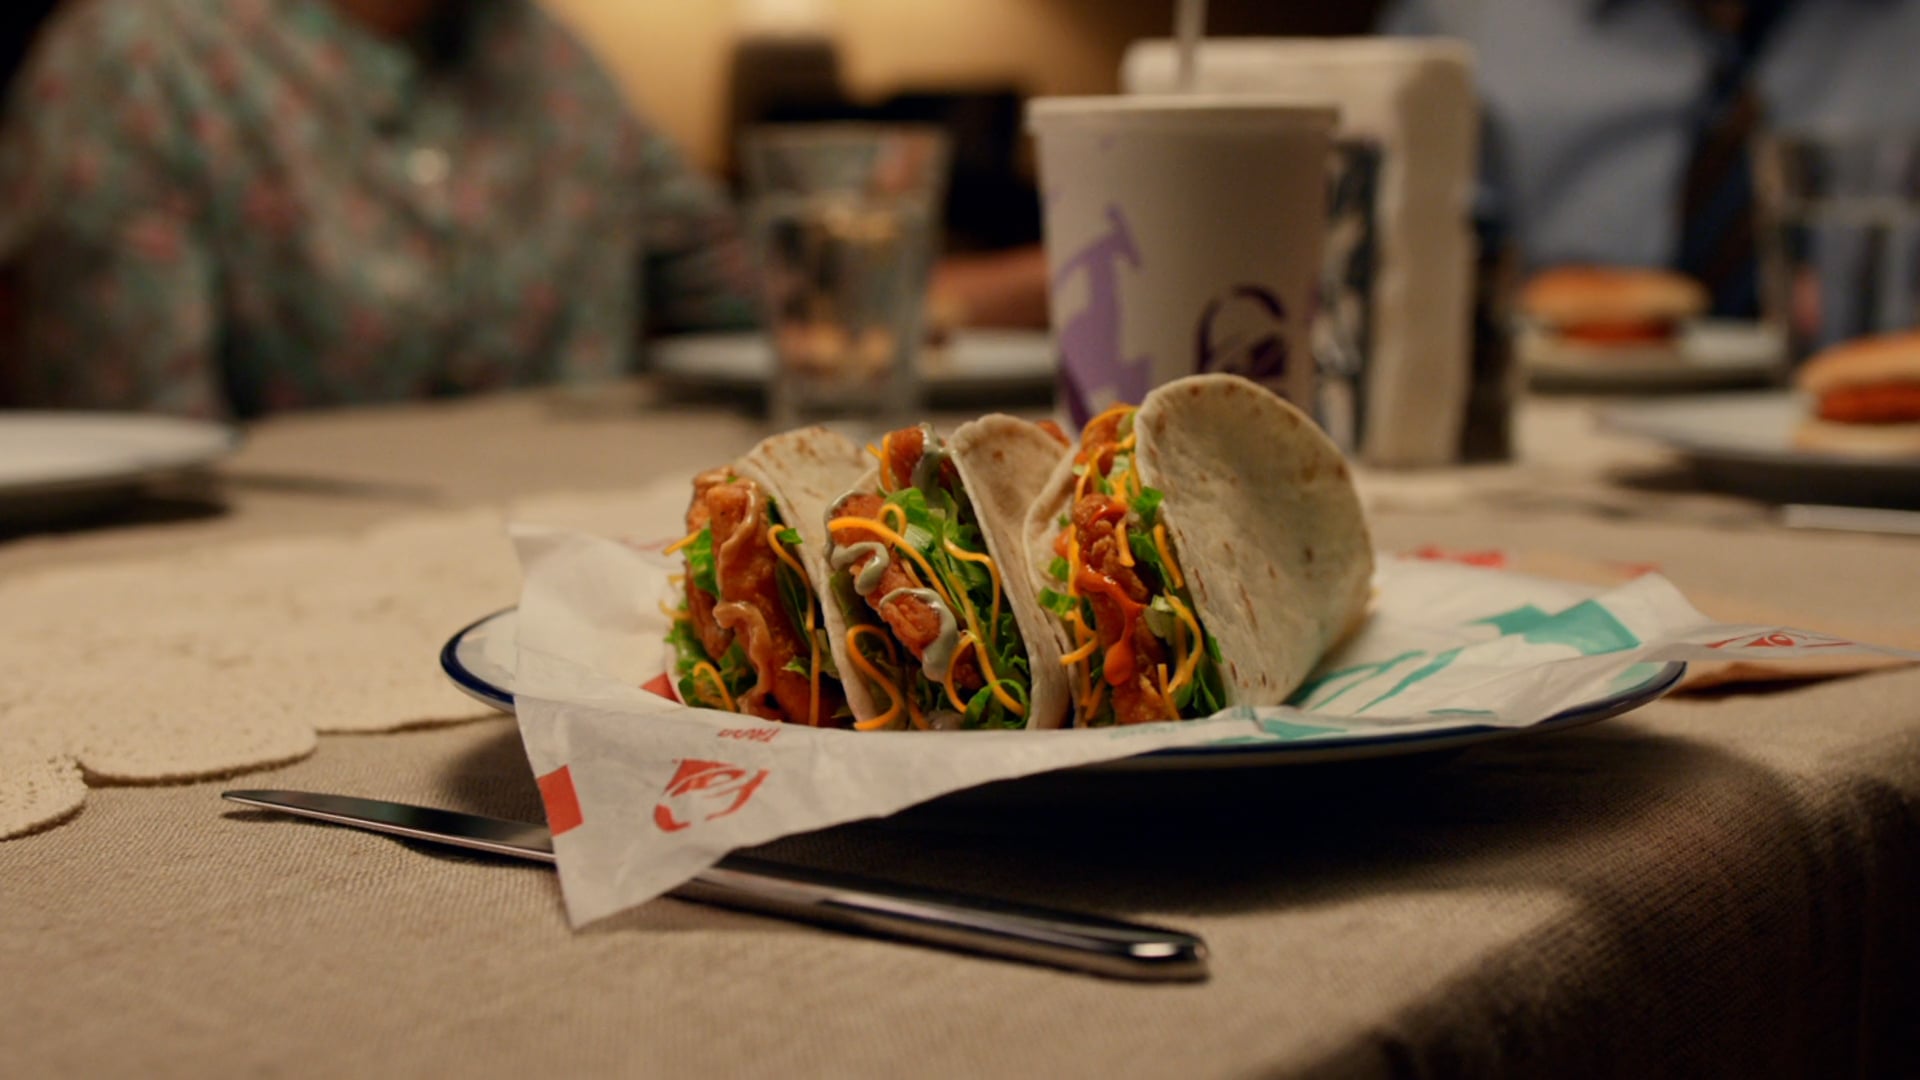 Taco Bell "Family Tradition"